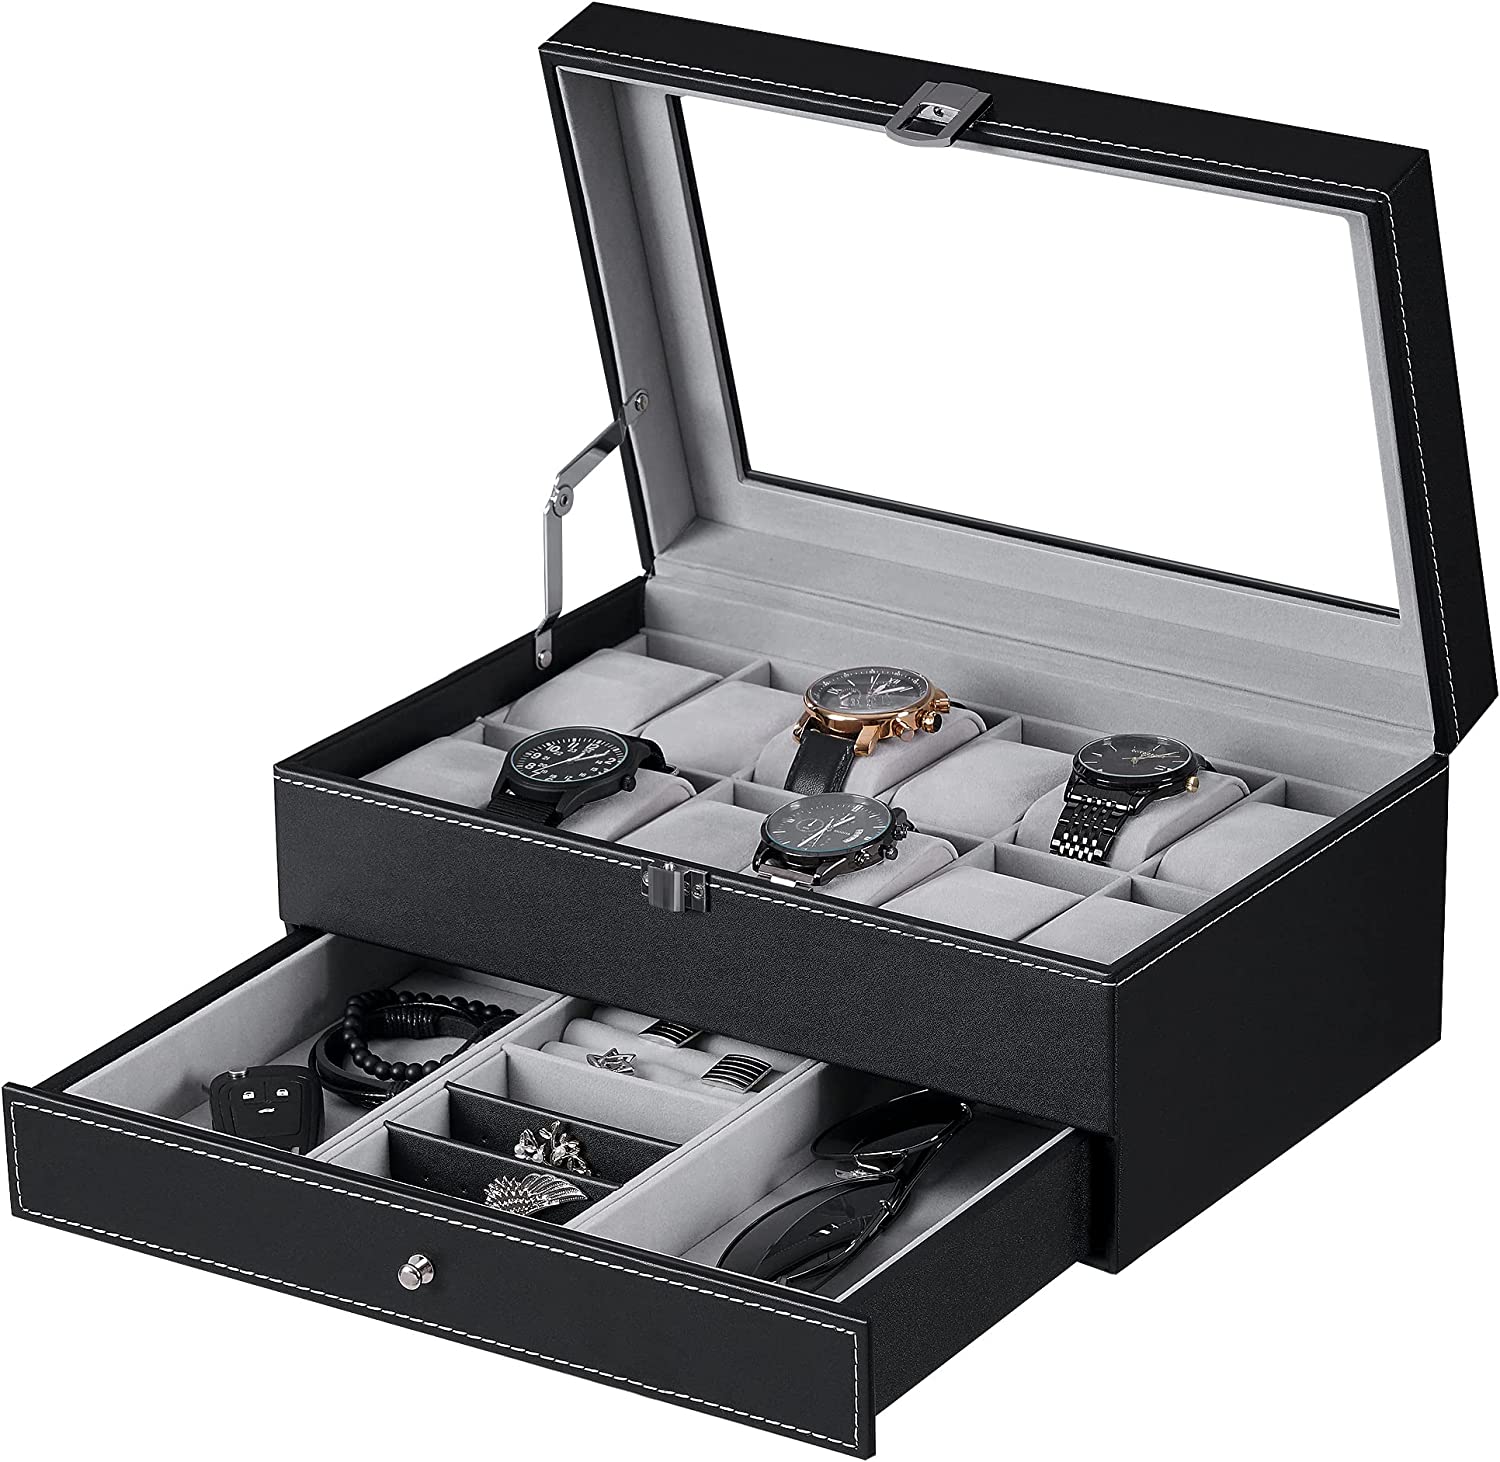 Watch Storage Box Organiser 12 Slots with Additional Drawer for Storage